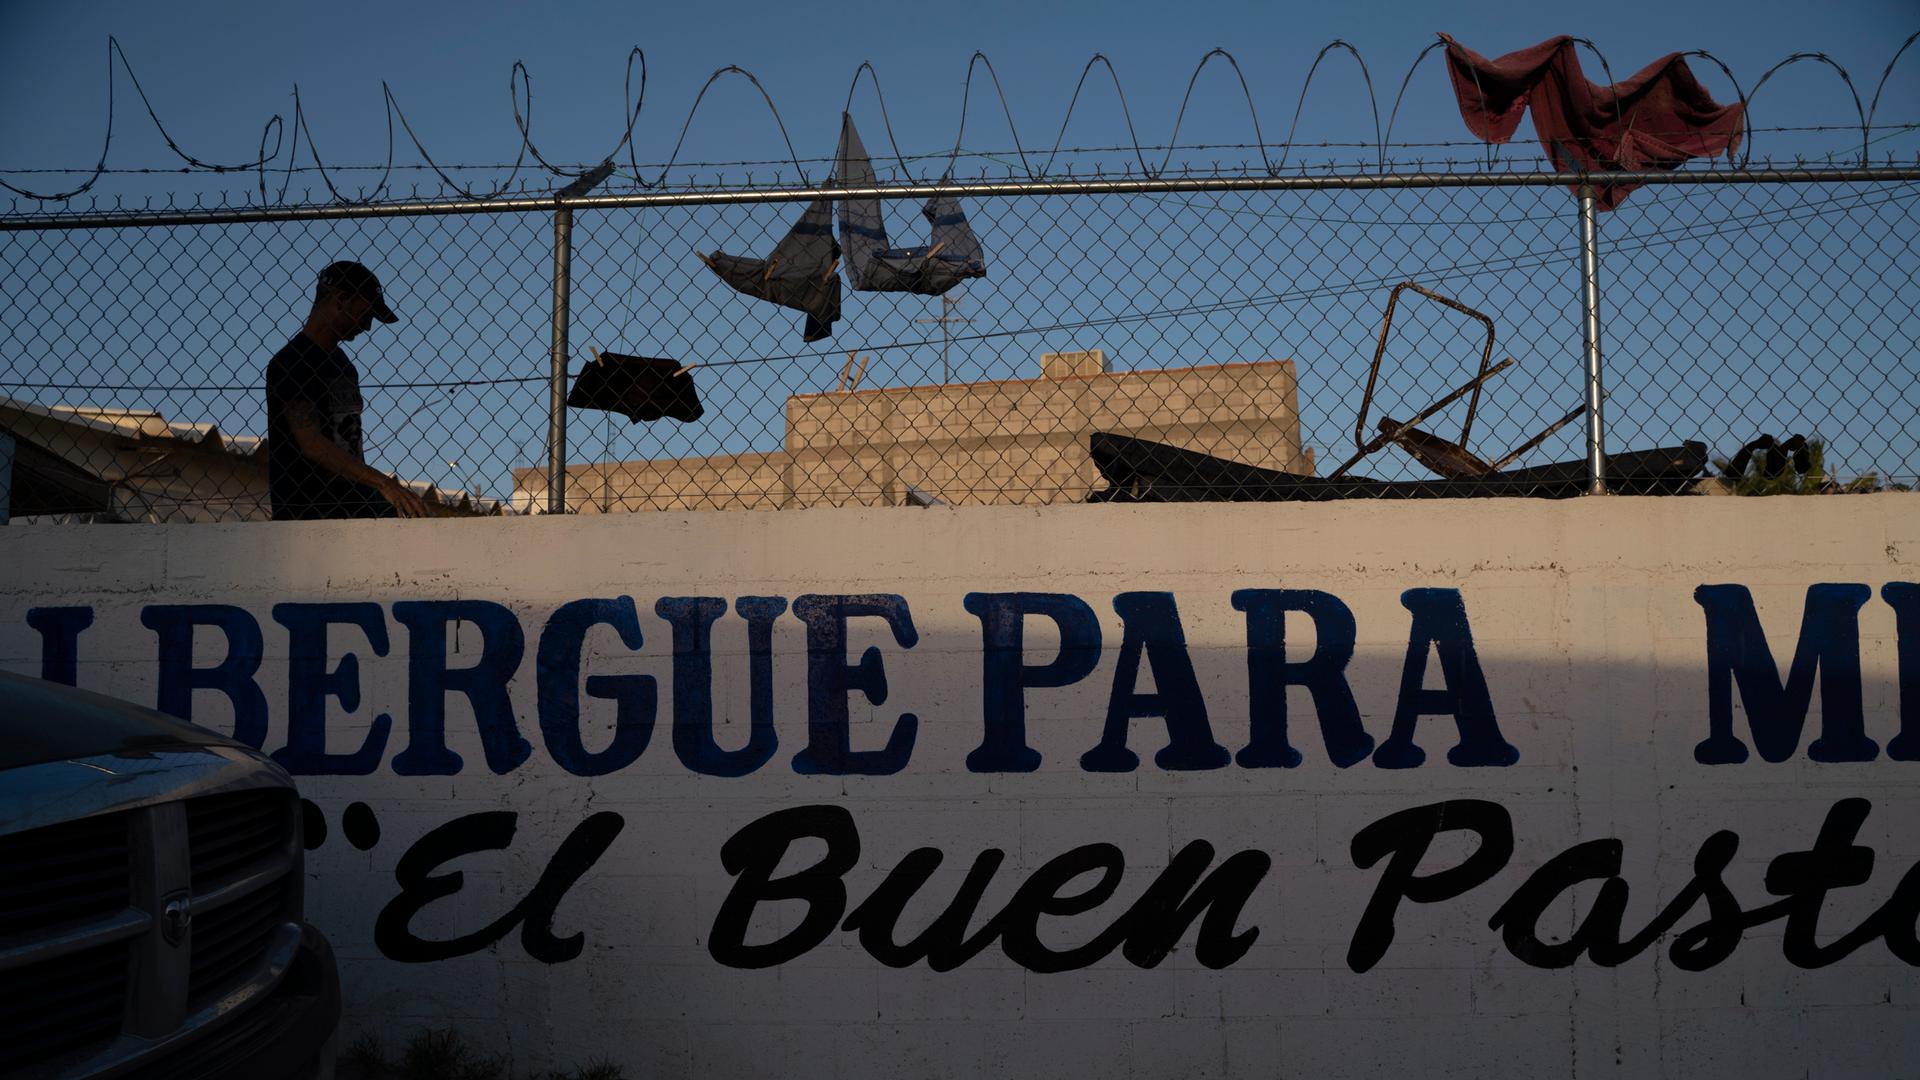 A man is silhouetted against a fence topped with razor wire. People have clothespinned clothing on the fence to dry. 